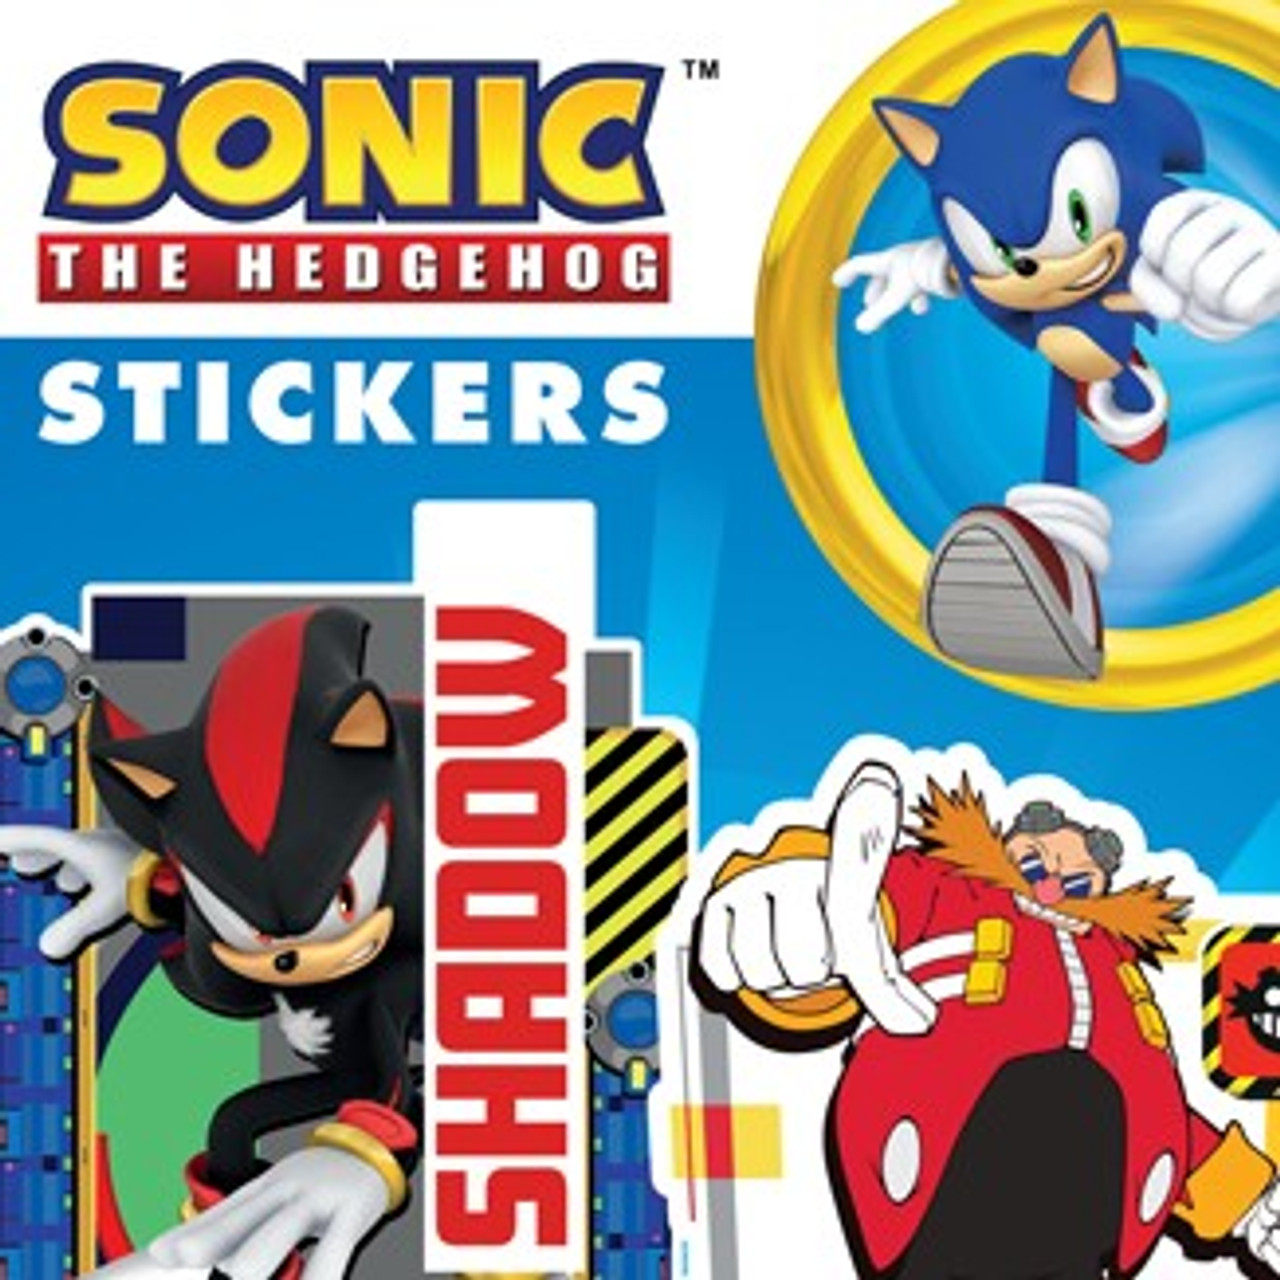 Sonic the Hedgehog Stickers